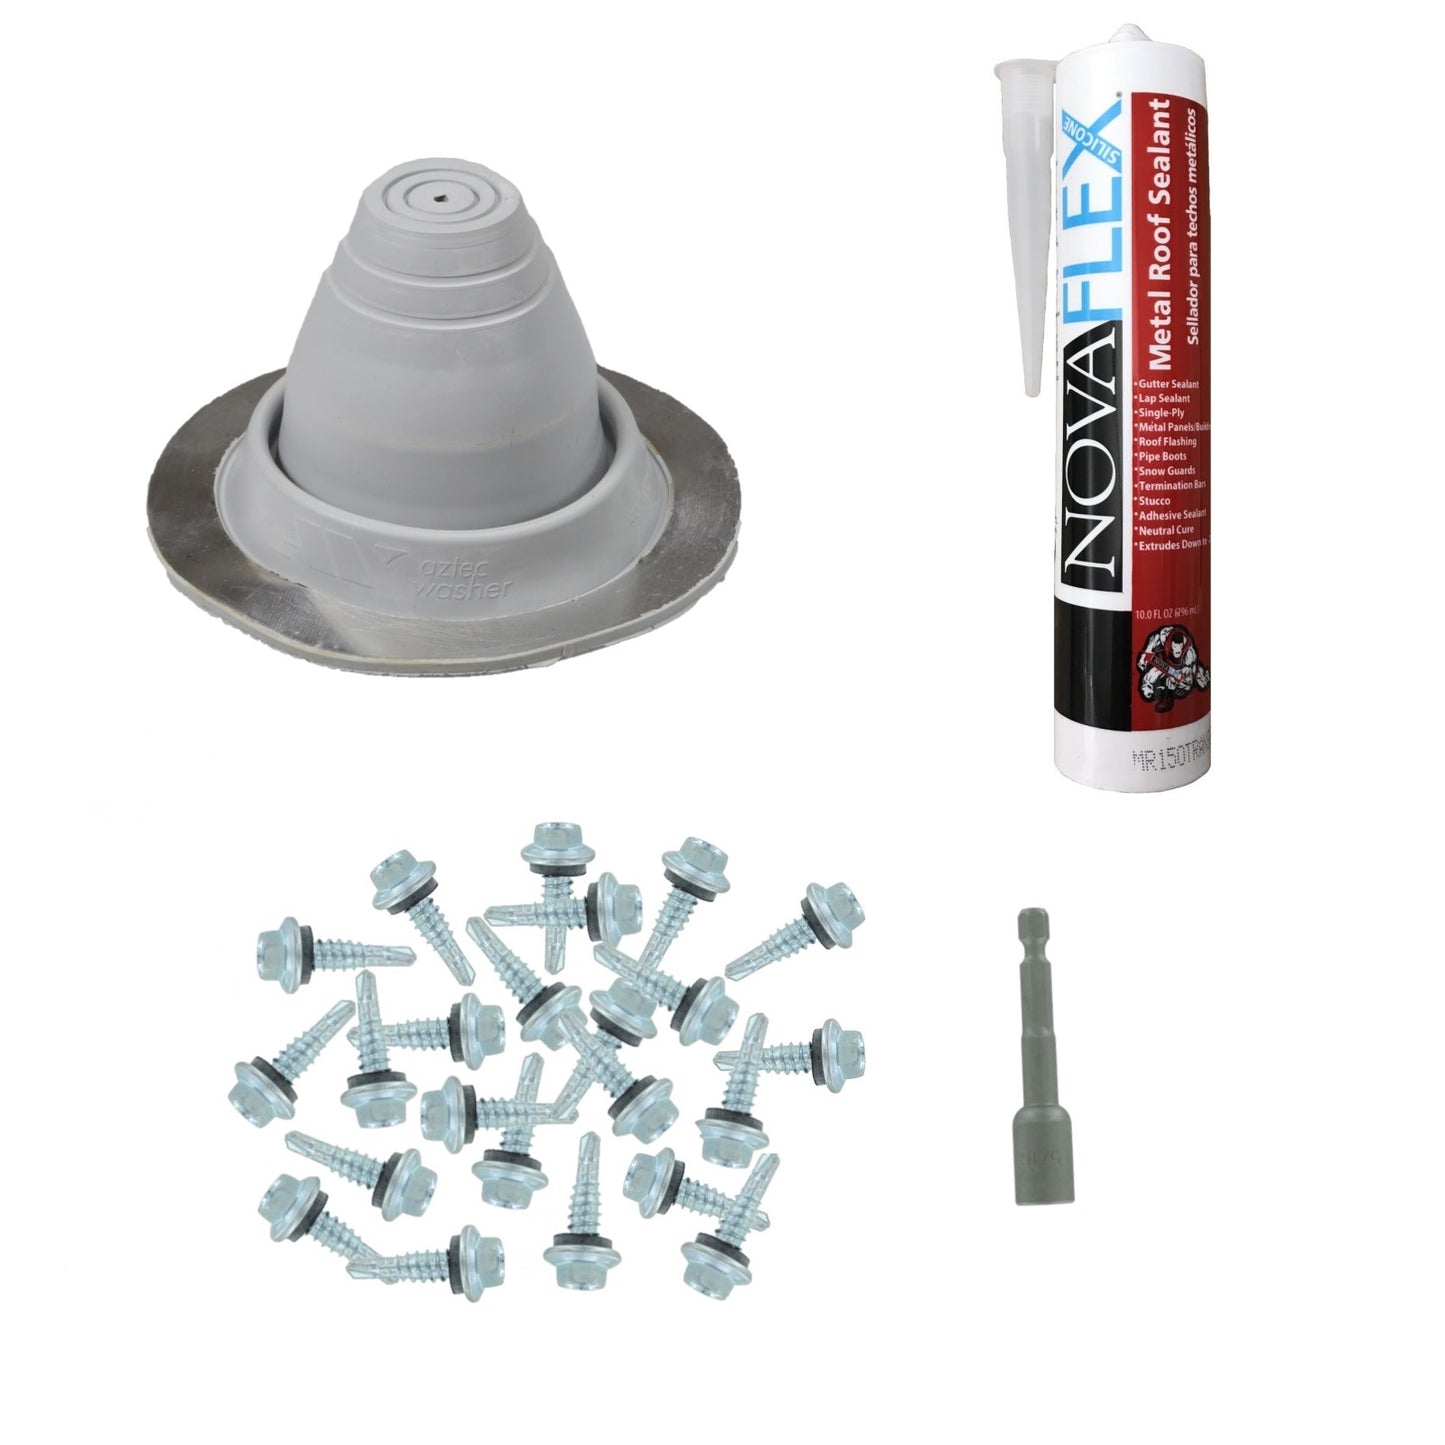 #1 Round EPDM Metal Roof Pipe Boot wInstall Kit Gray